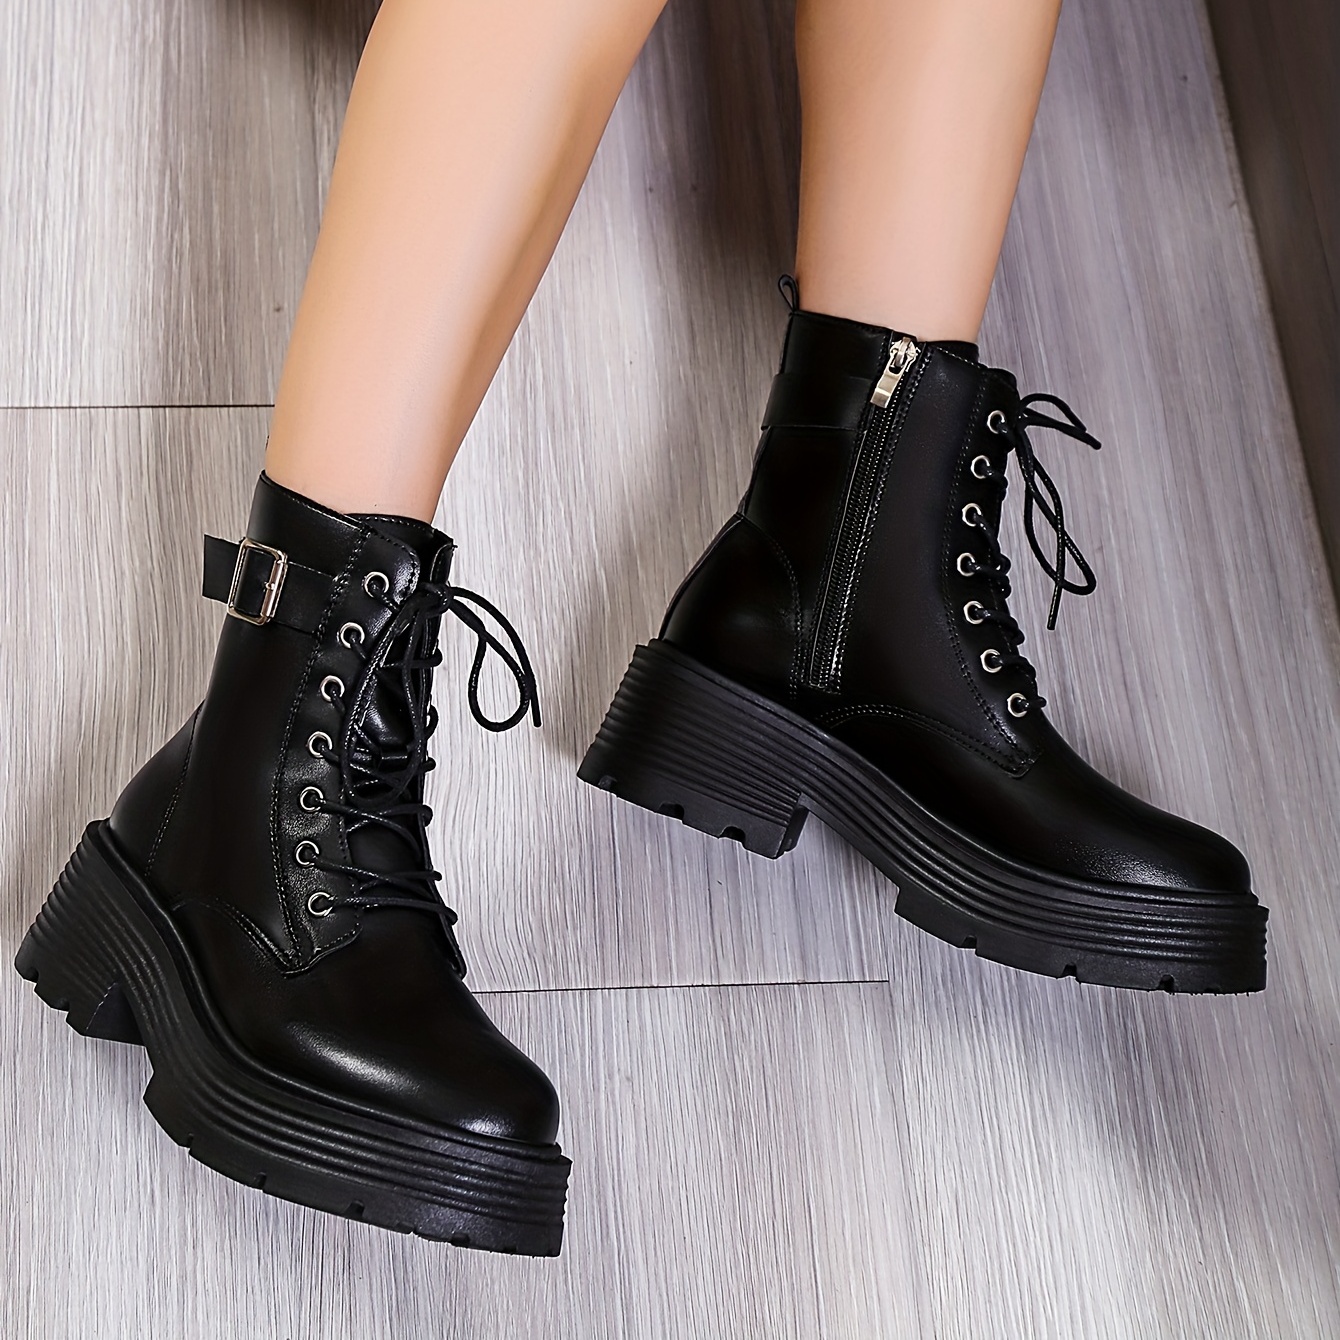 Women's Platform Ankle Boots, Round Toe Lace Up & Side Zipper Motorcycle  Boots, Chunky Heeled Combat Boots